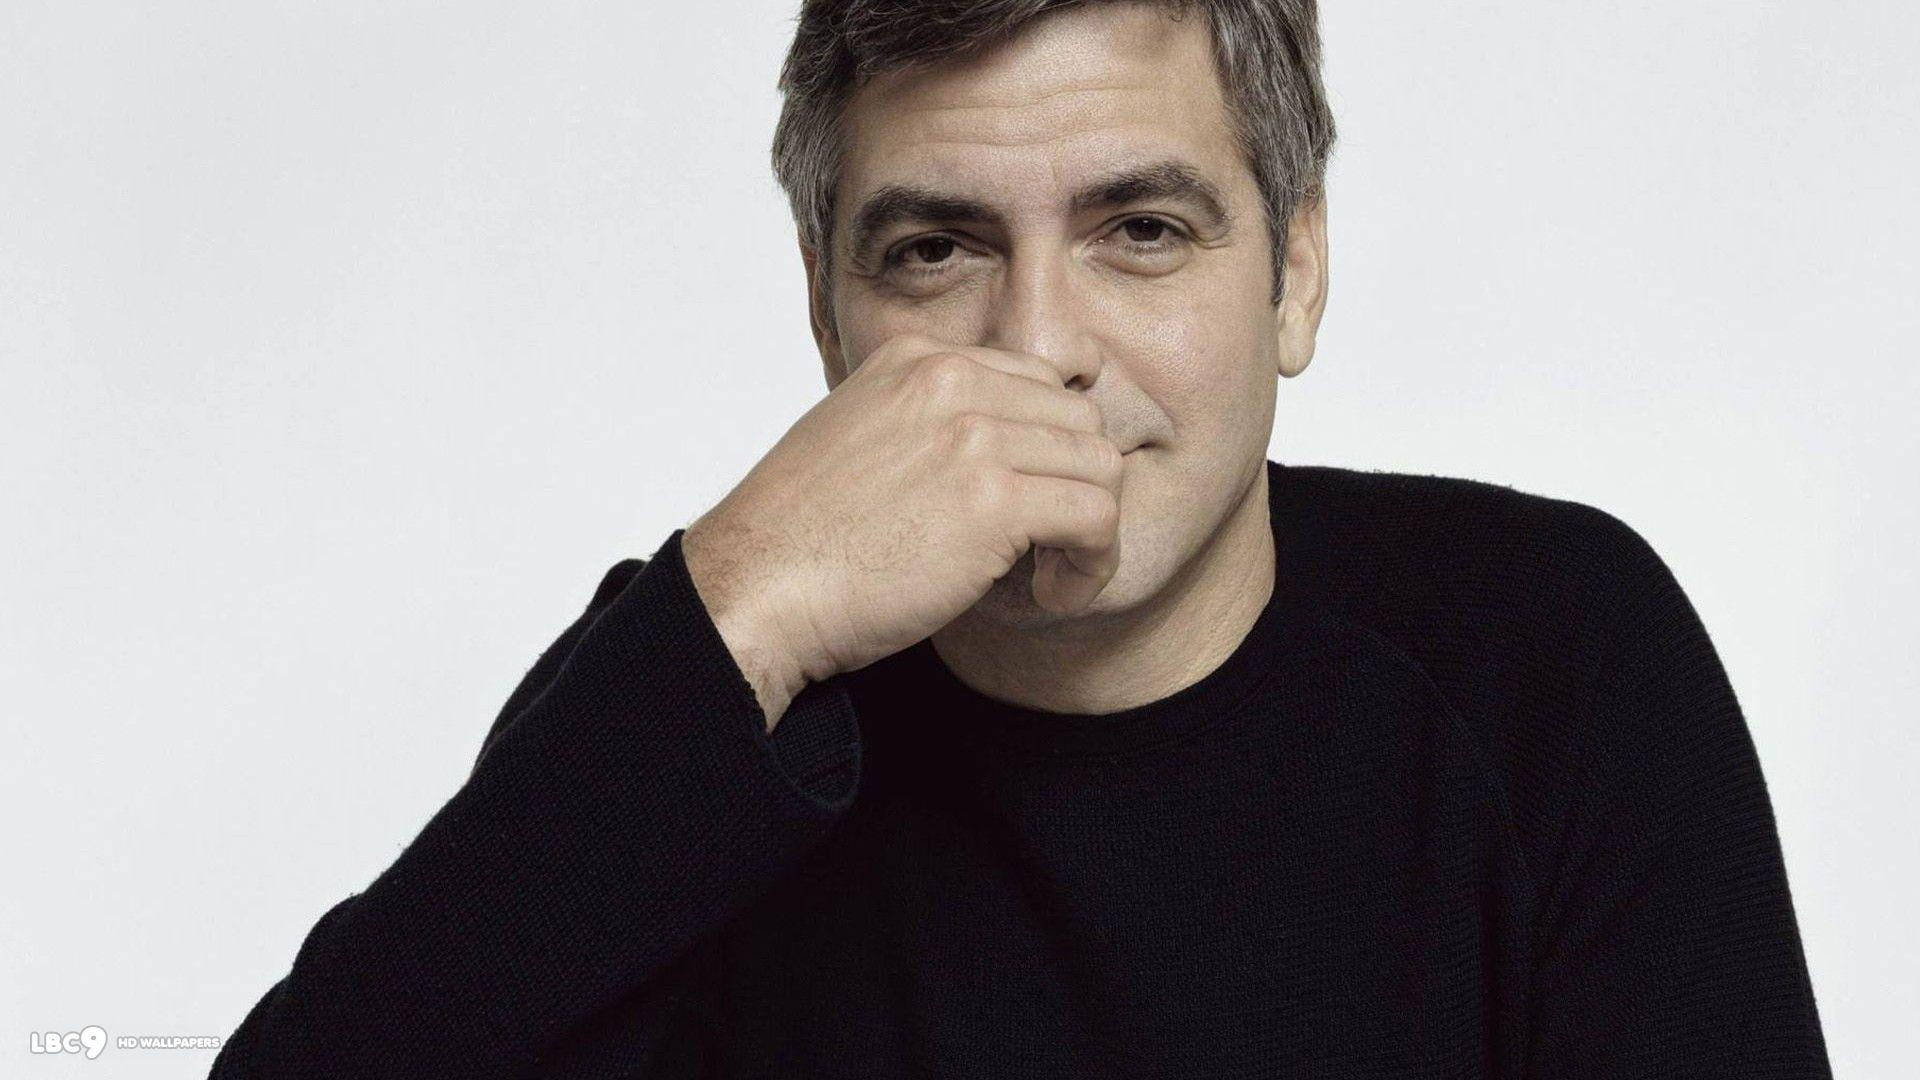 George Clooney Hands On His Face Wallpaper